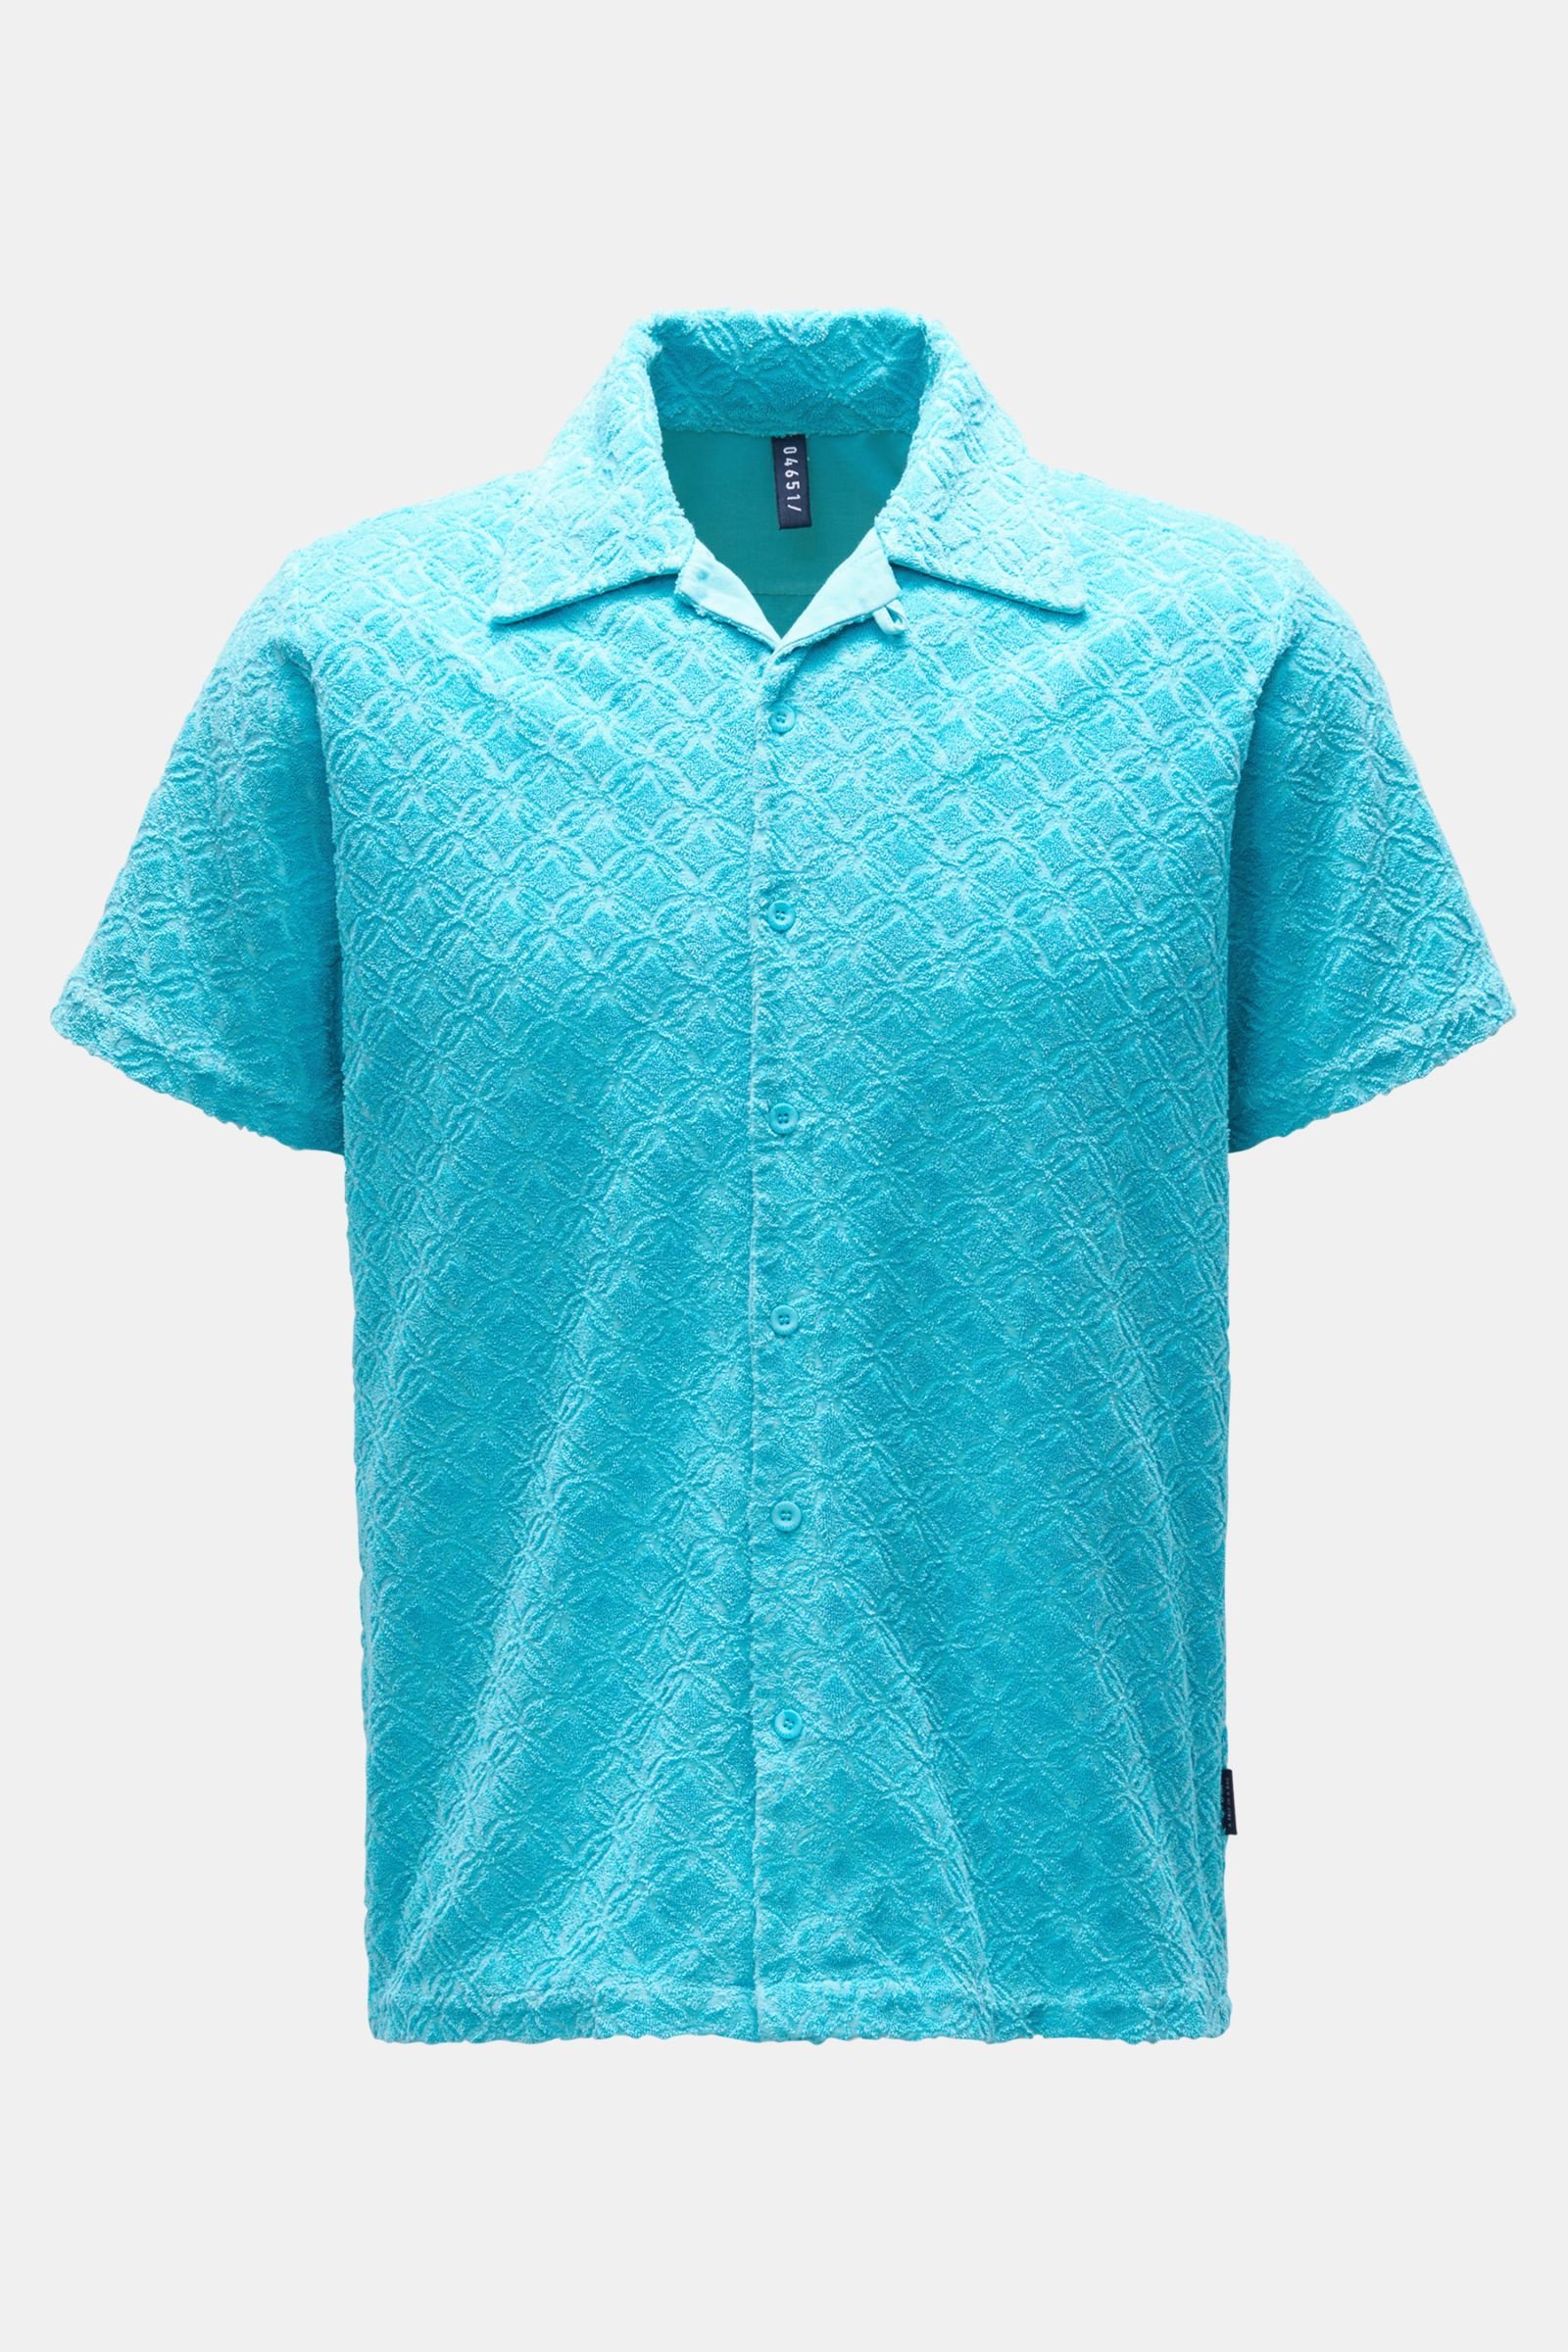 Terry short sleeve shirt 'Terry Shirt' Kent collar turquoise patterned